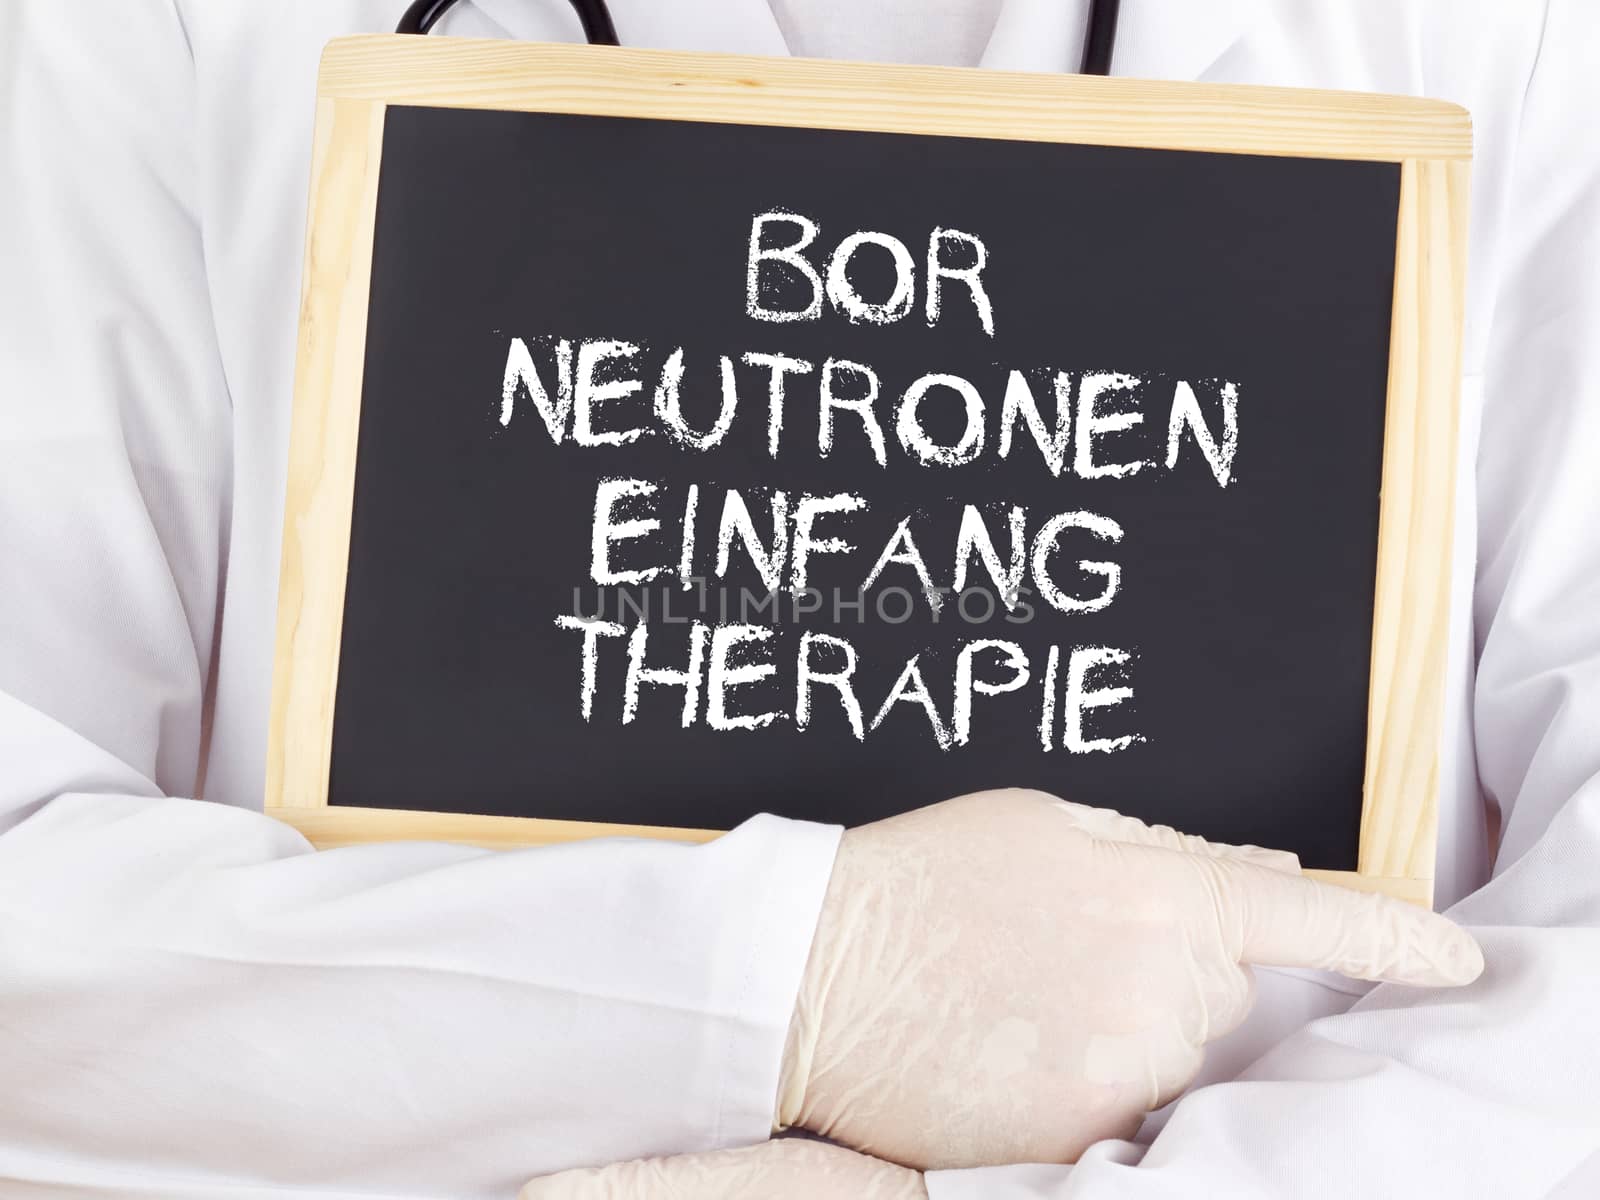 Doctor shows information: boron neutron capture therapy in german